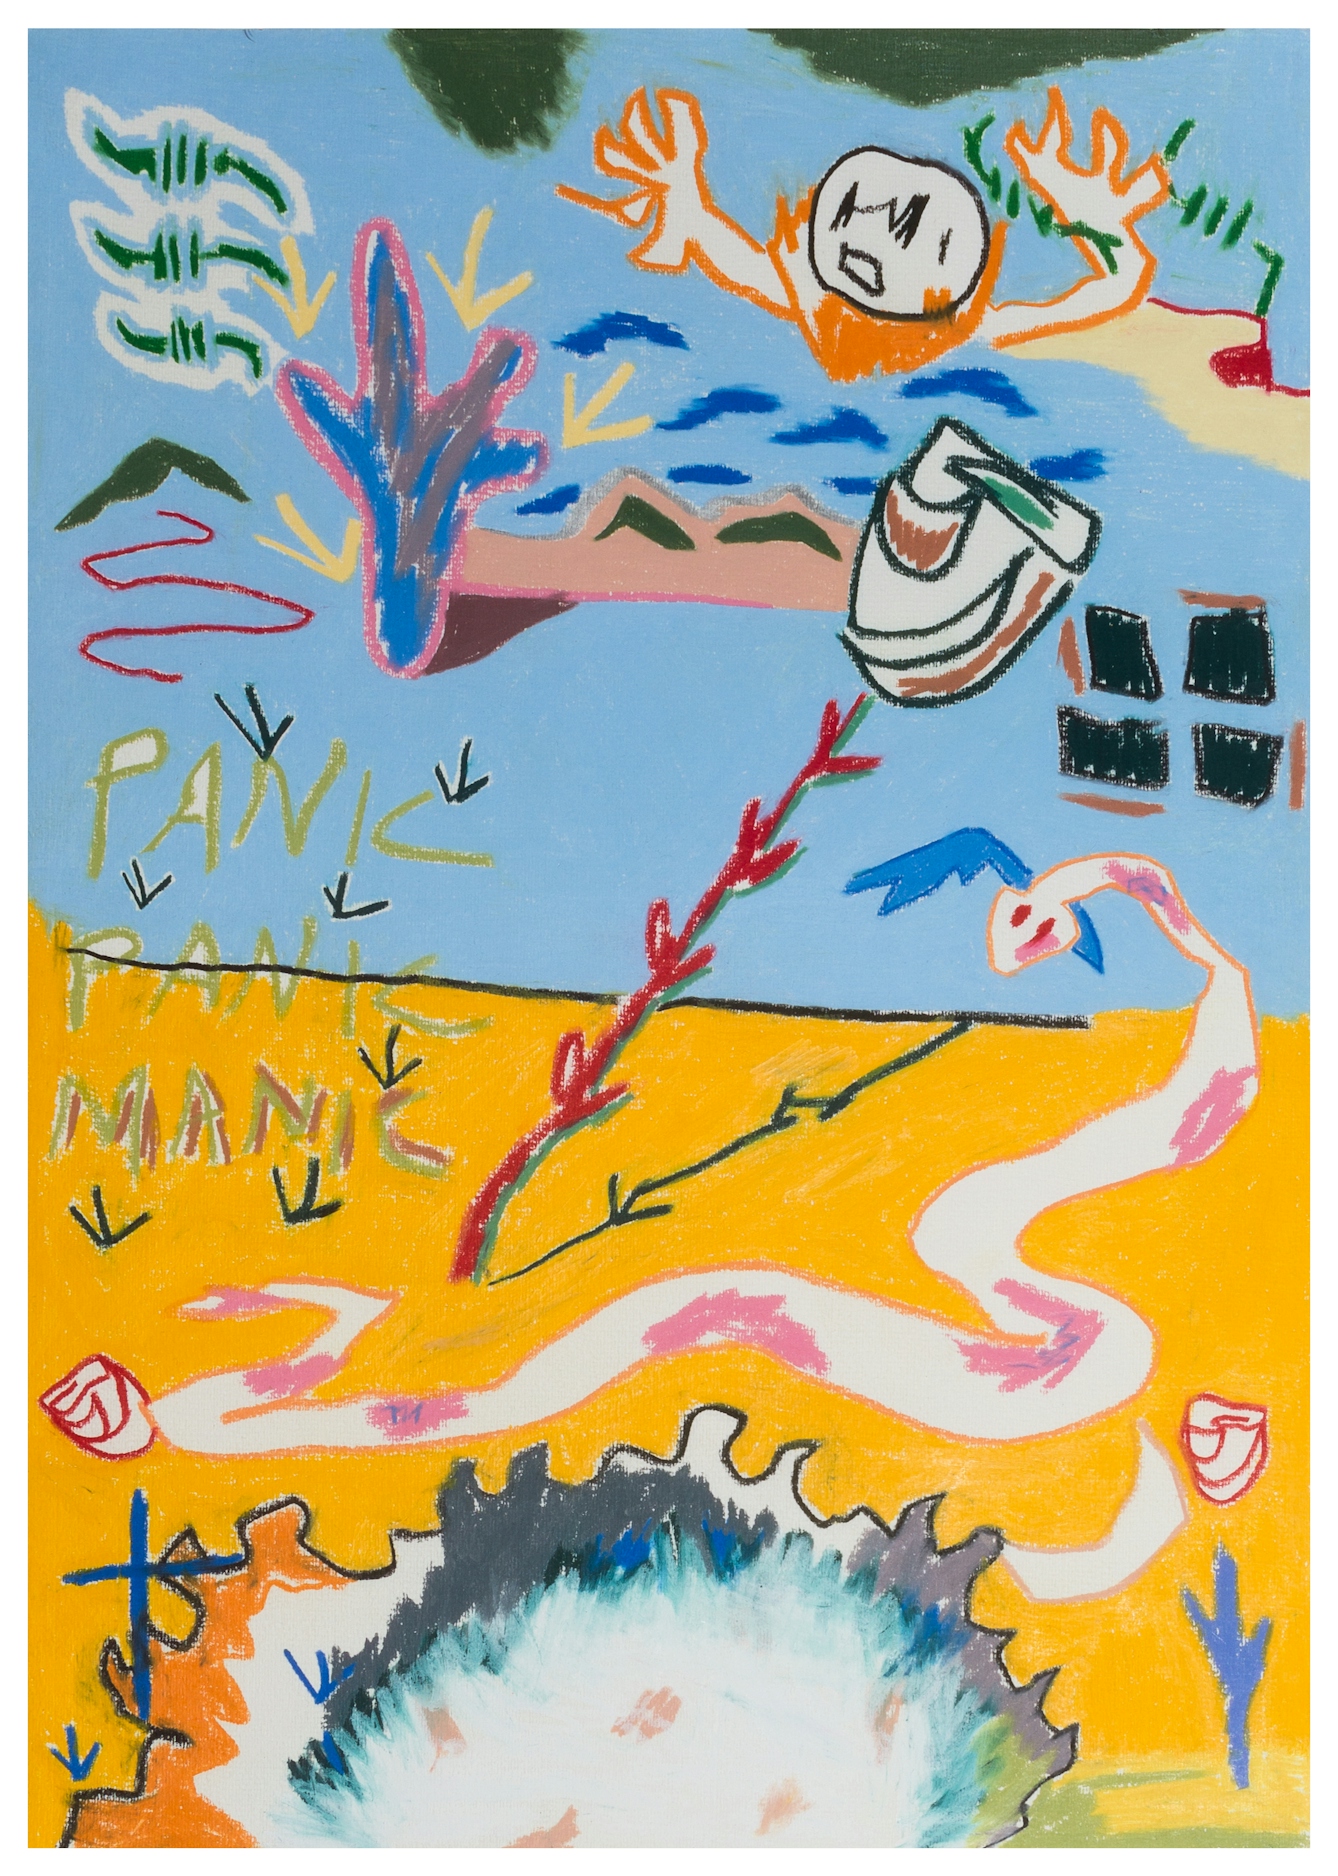 Painted abstract and expressive artwork made up of vibrant colours and graphic forms. The scene shows a horizon line, below which is a yellow sand-like land and above which is a blue sky. In the sky are several forms including a menacing figure showing an angry head with arms and hands raised to either side. There is also a cactus-like shape and small torn sections of photographic film complete with sprocket holes. Crossing the horizon line is a single rose with thorn covered stem and the words "PANIC, PANIC, MANIC". On the sandy surface is a long snake, what looks like a large crater and a cross.